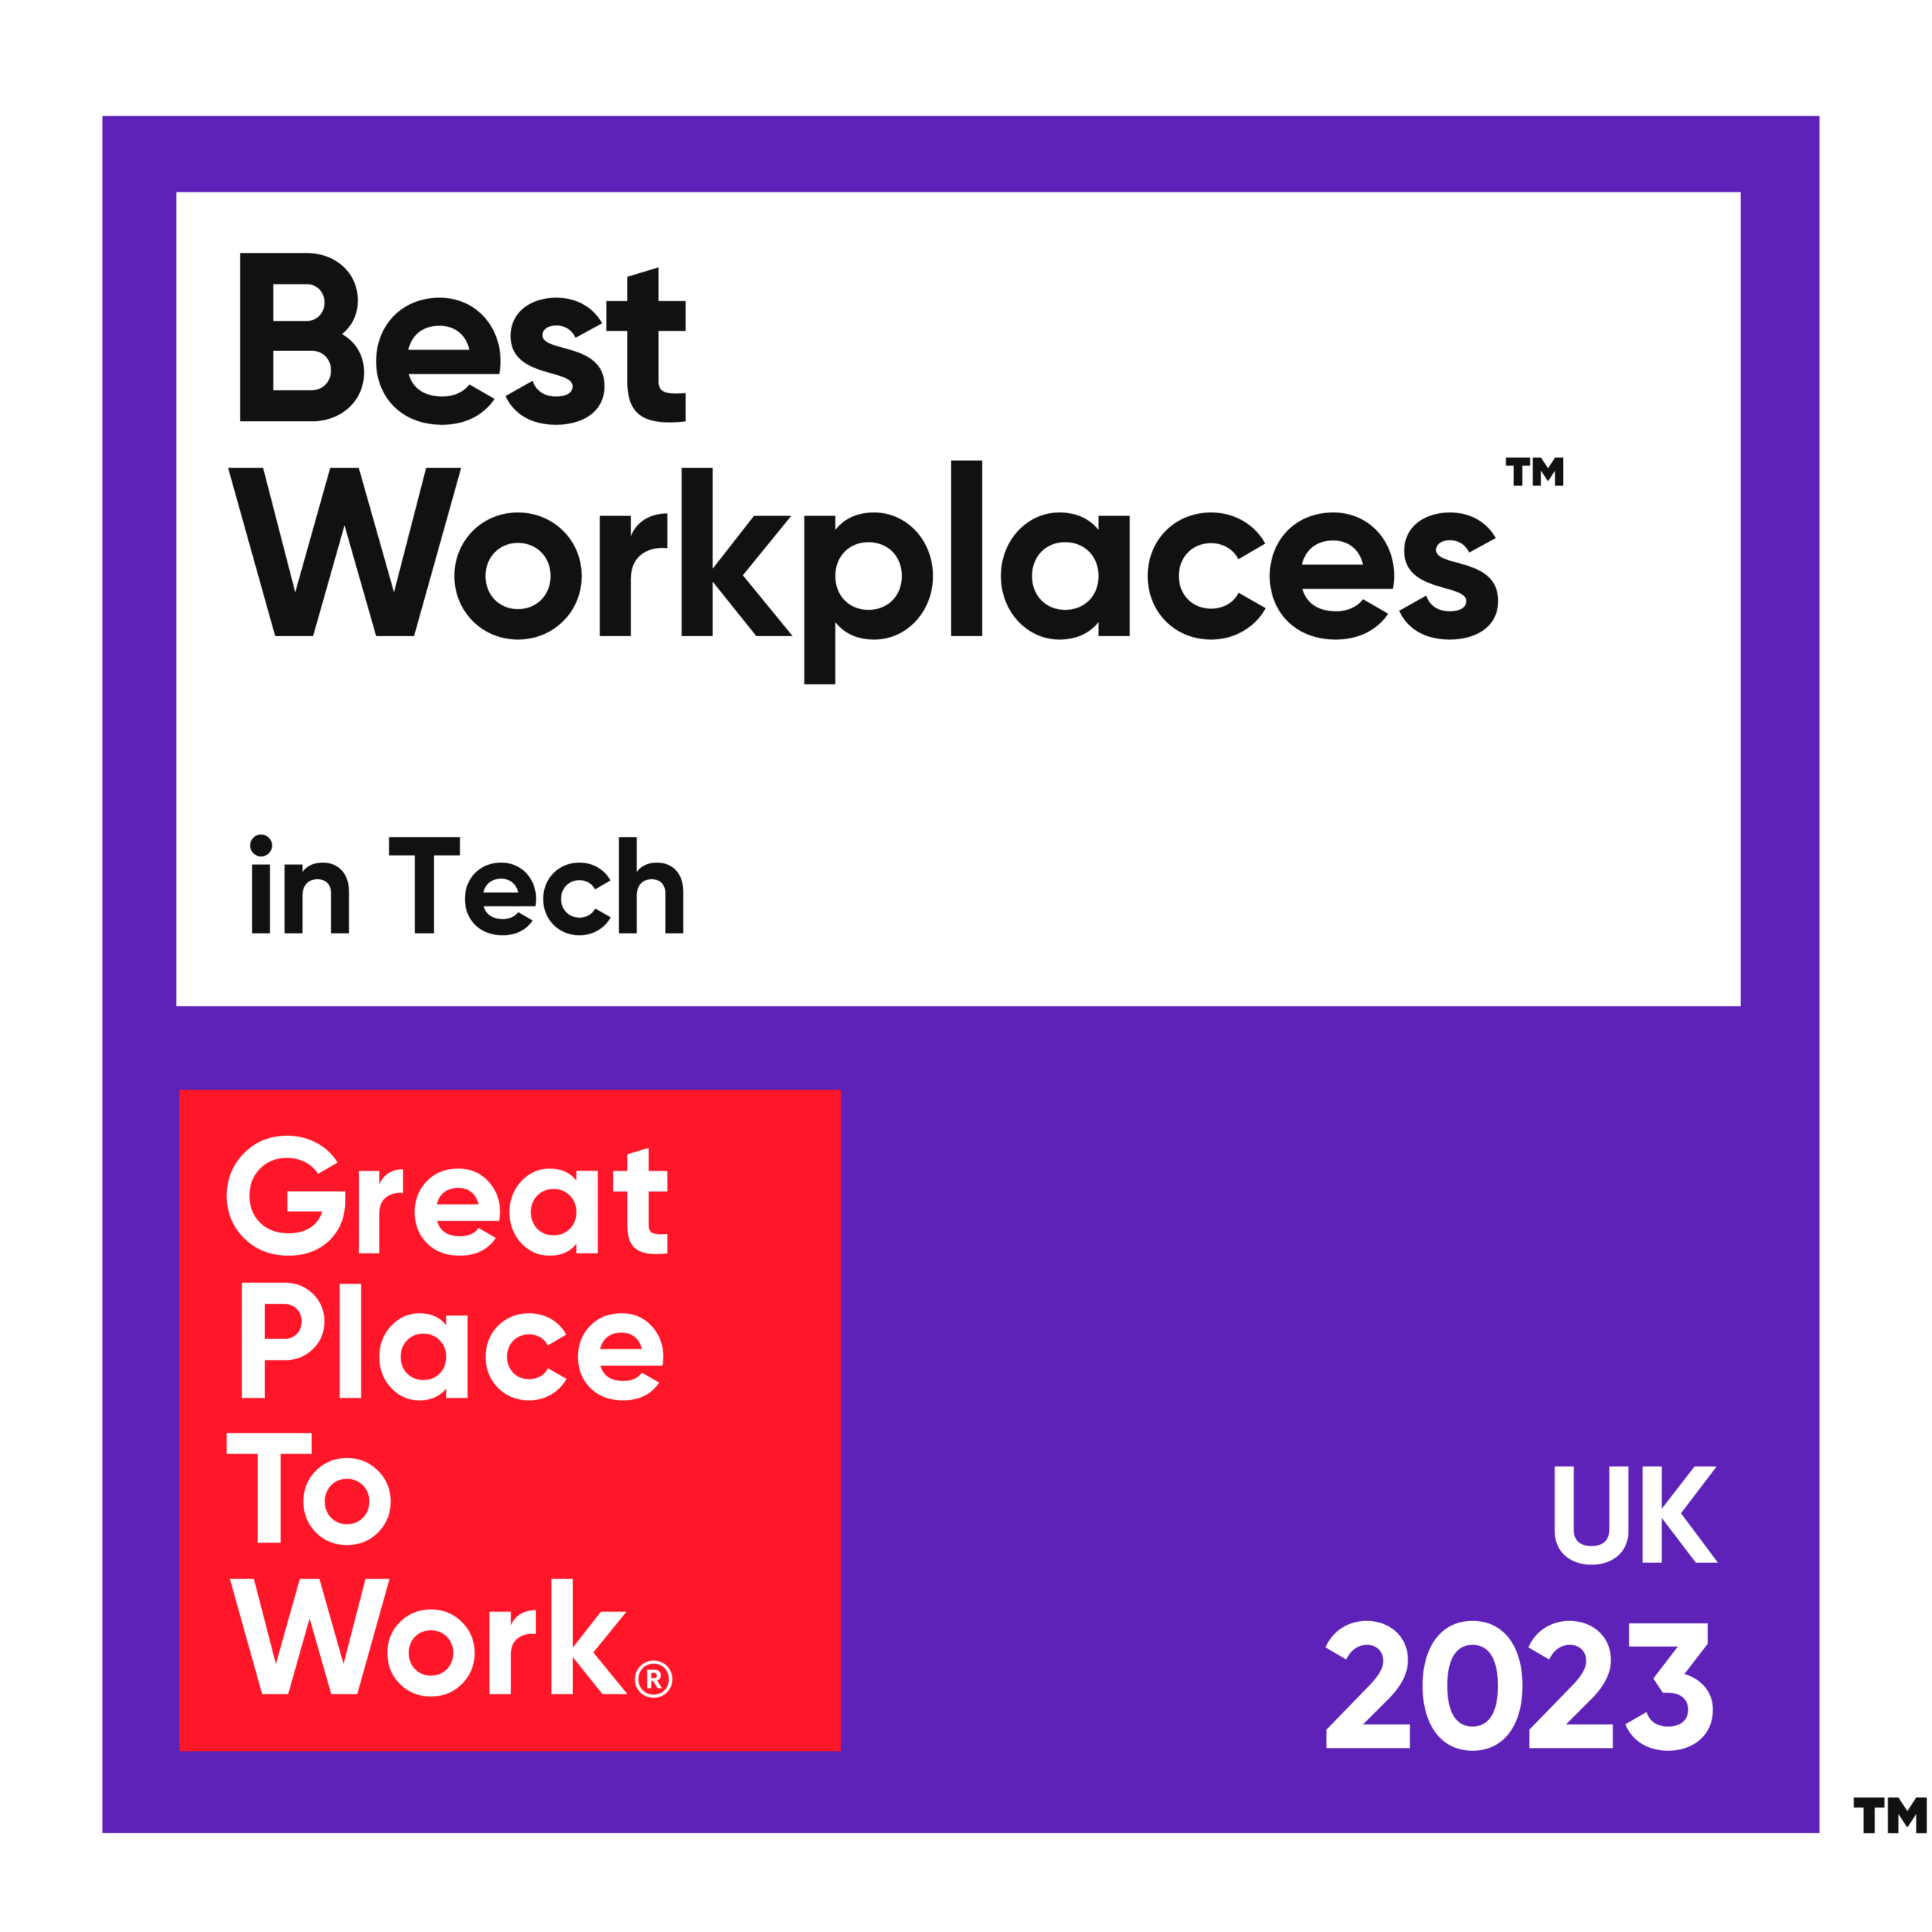 Great place to work in tech, 2023